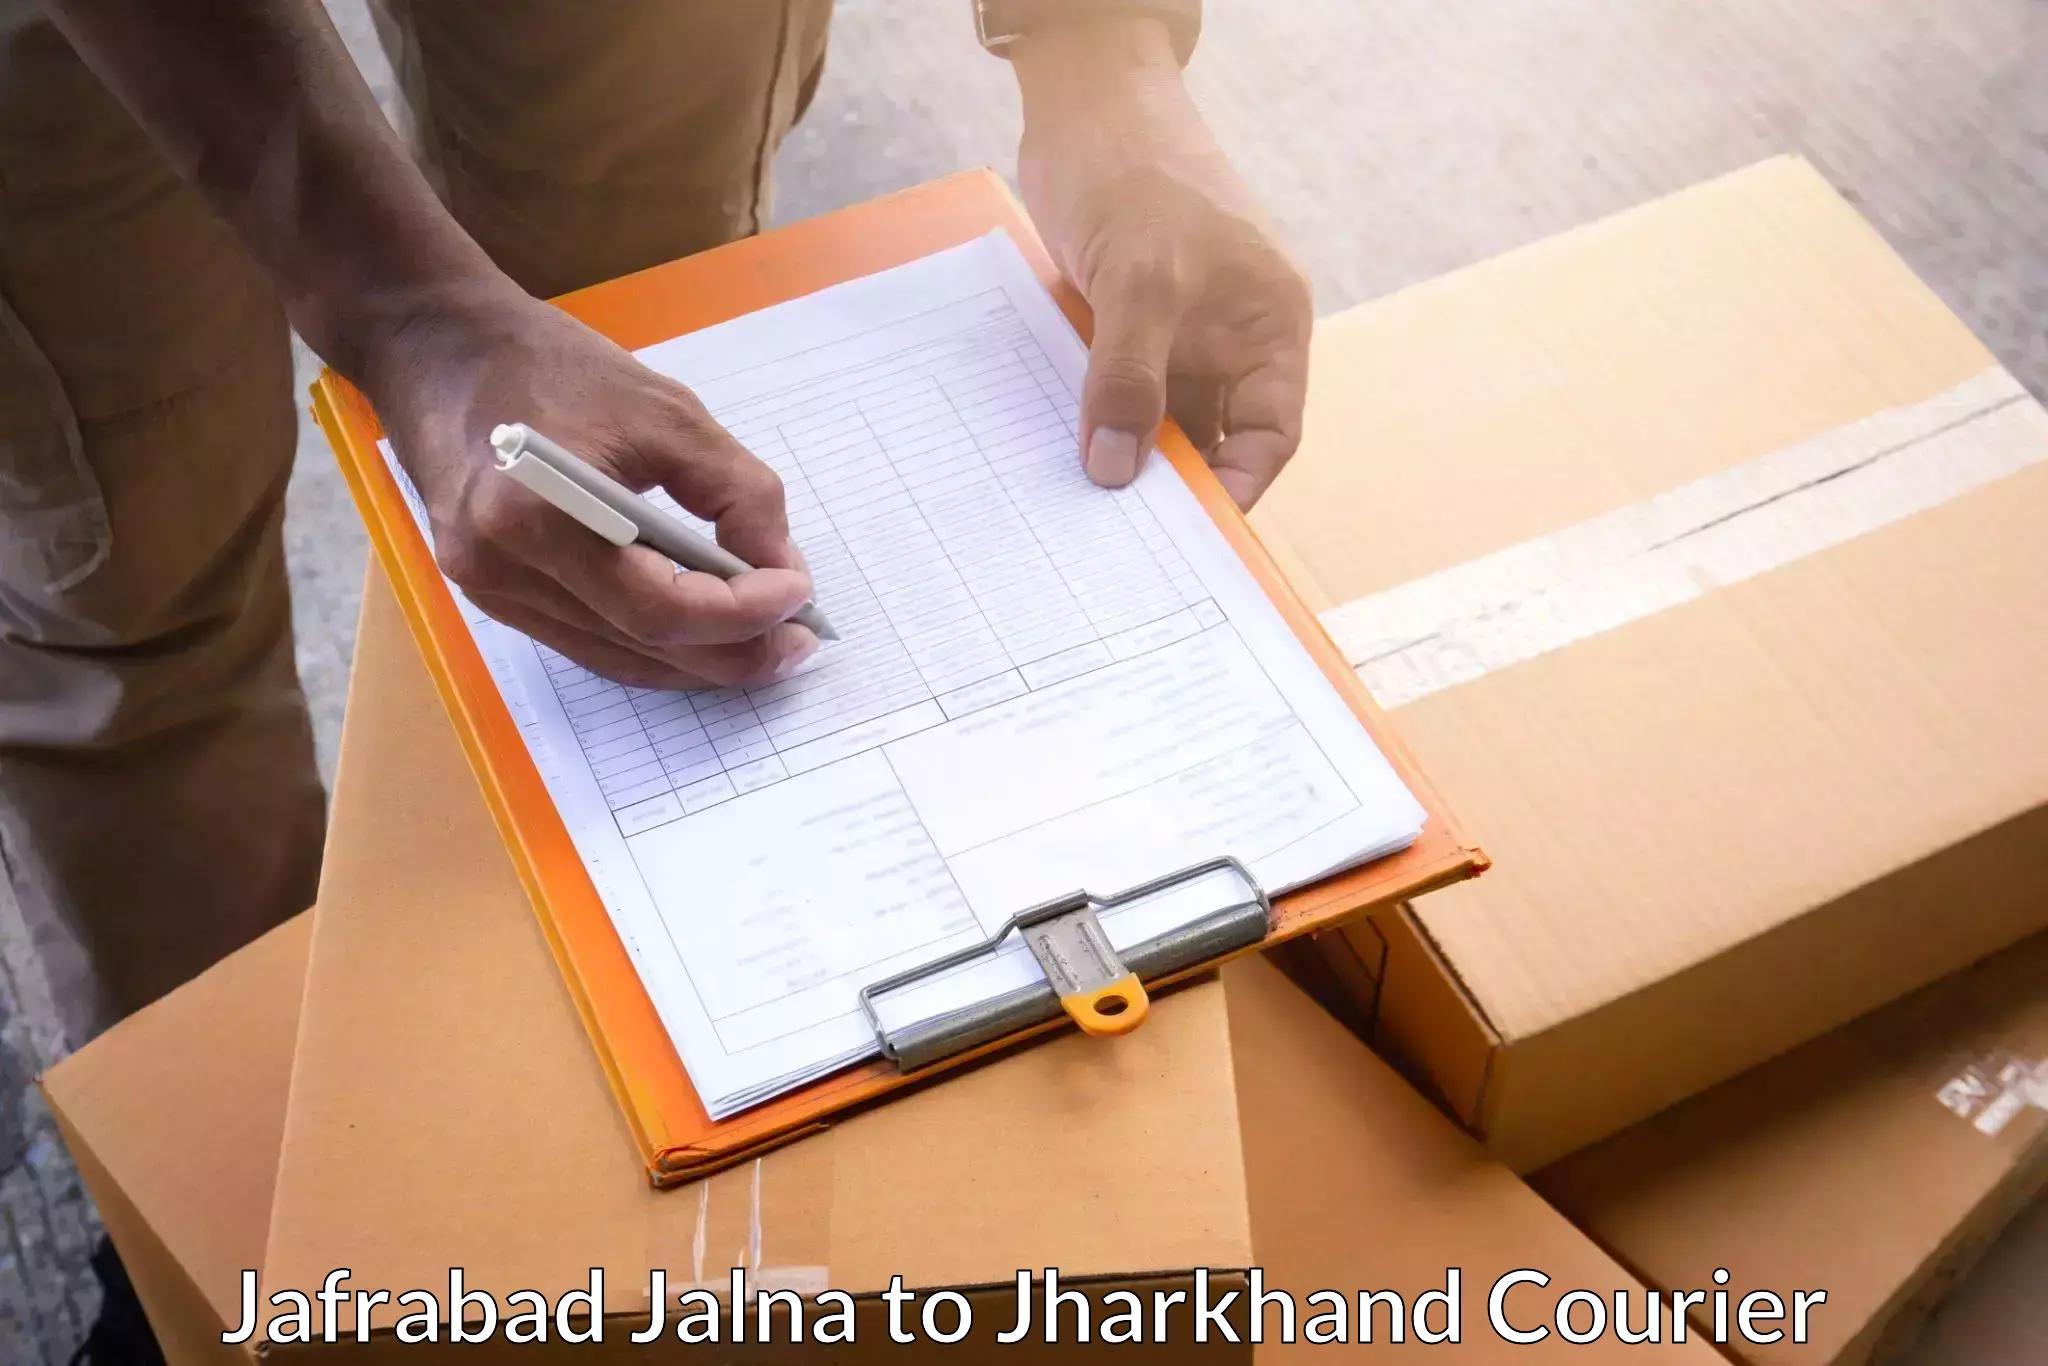 Seamless shipping experience Jafrabad Jalna to Jharkhand